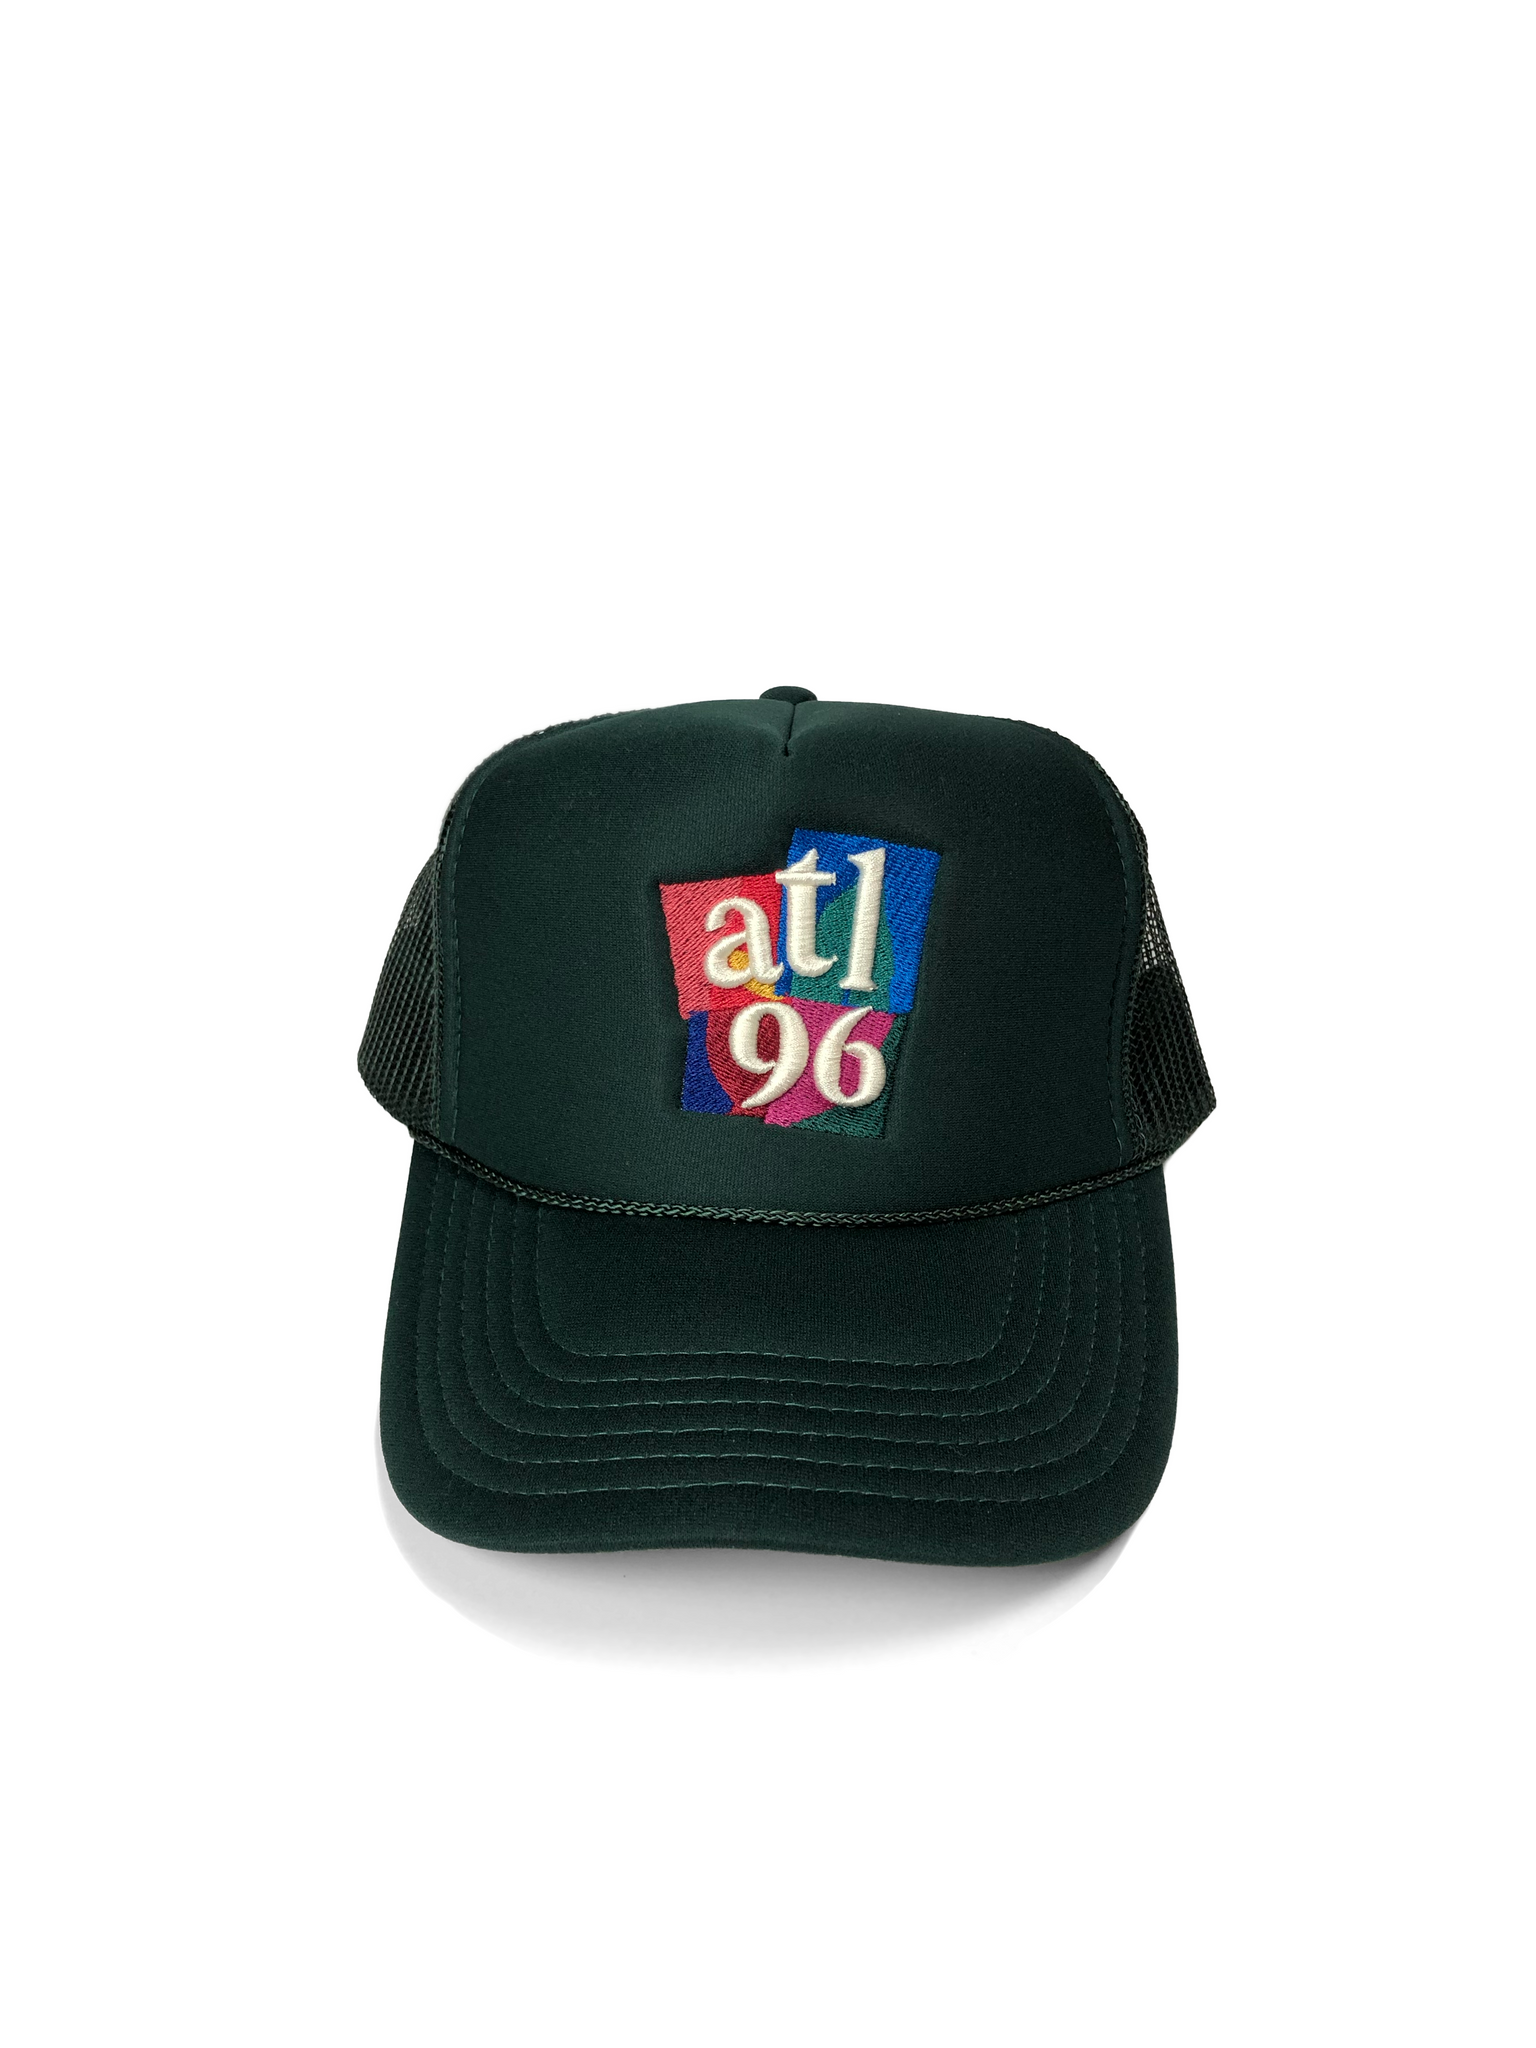 atl1996 Stacked '96 'Opening Ceremony' Trucker Hat